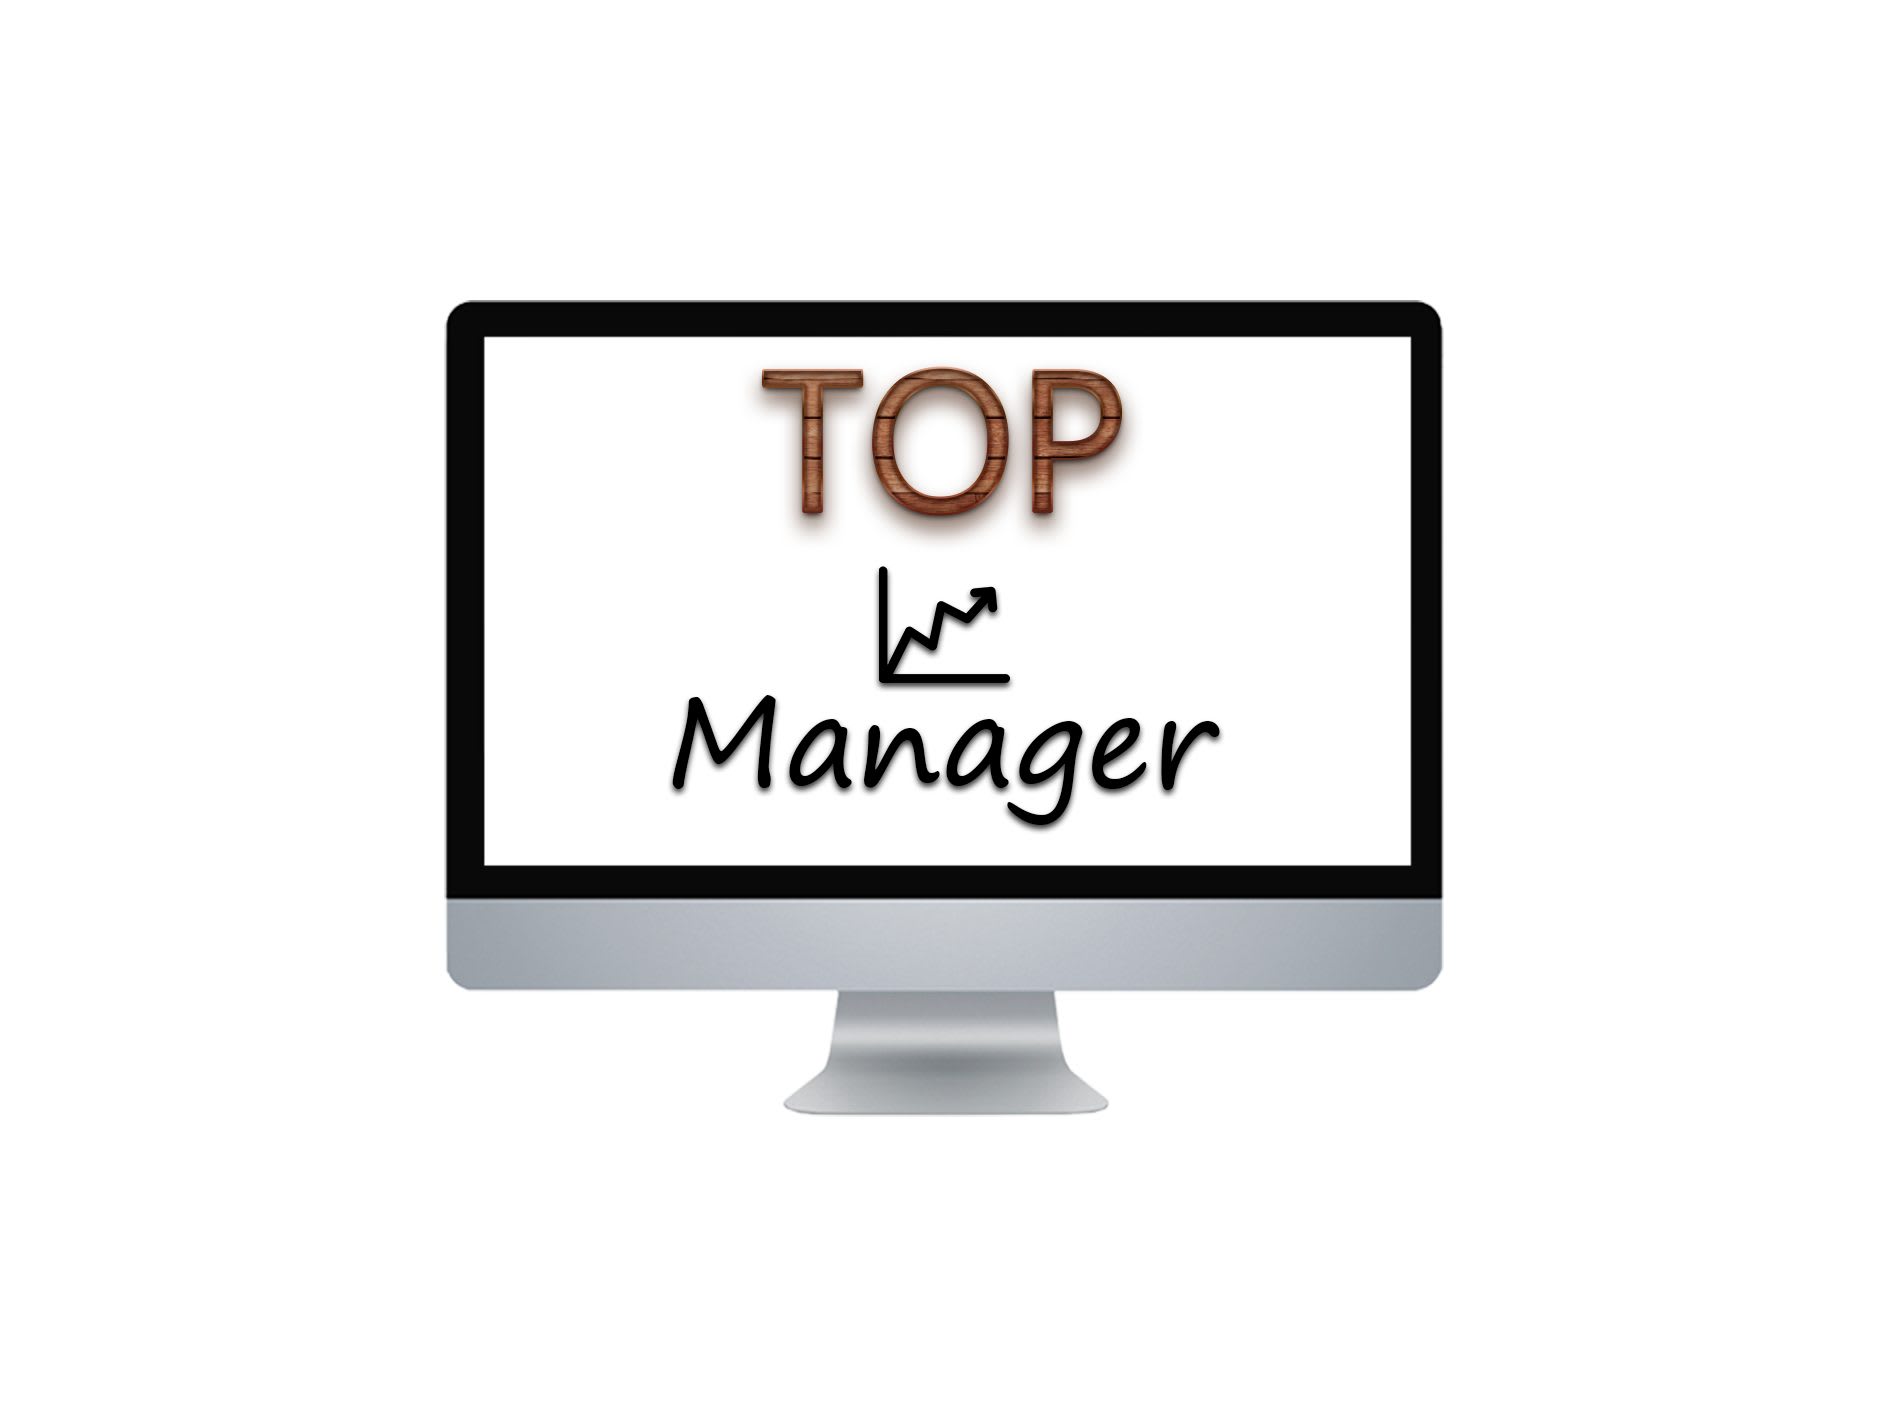 TopManager